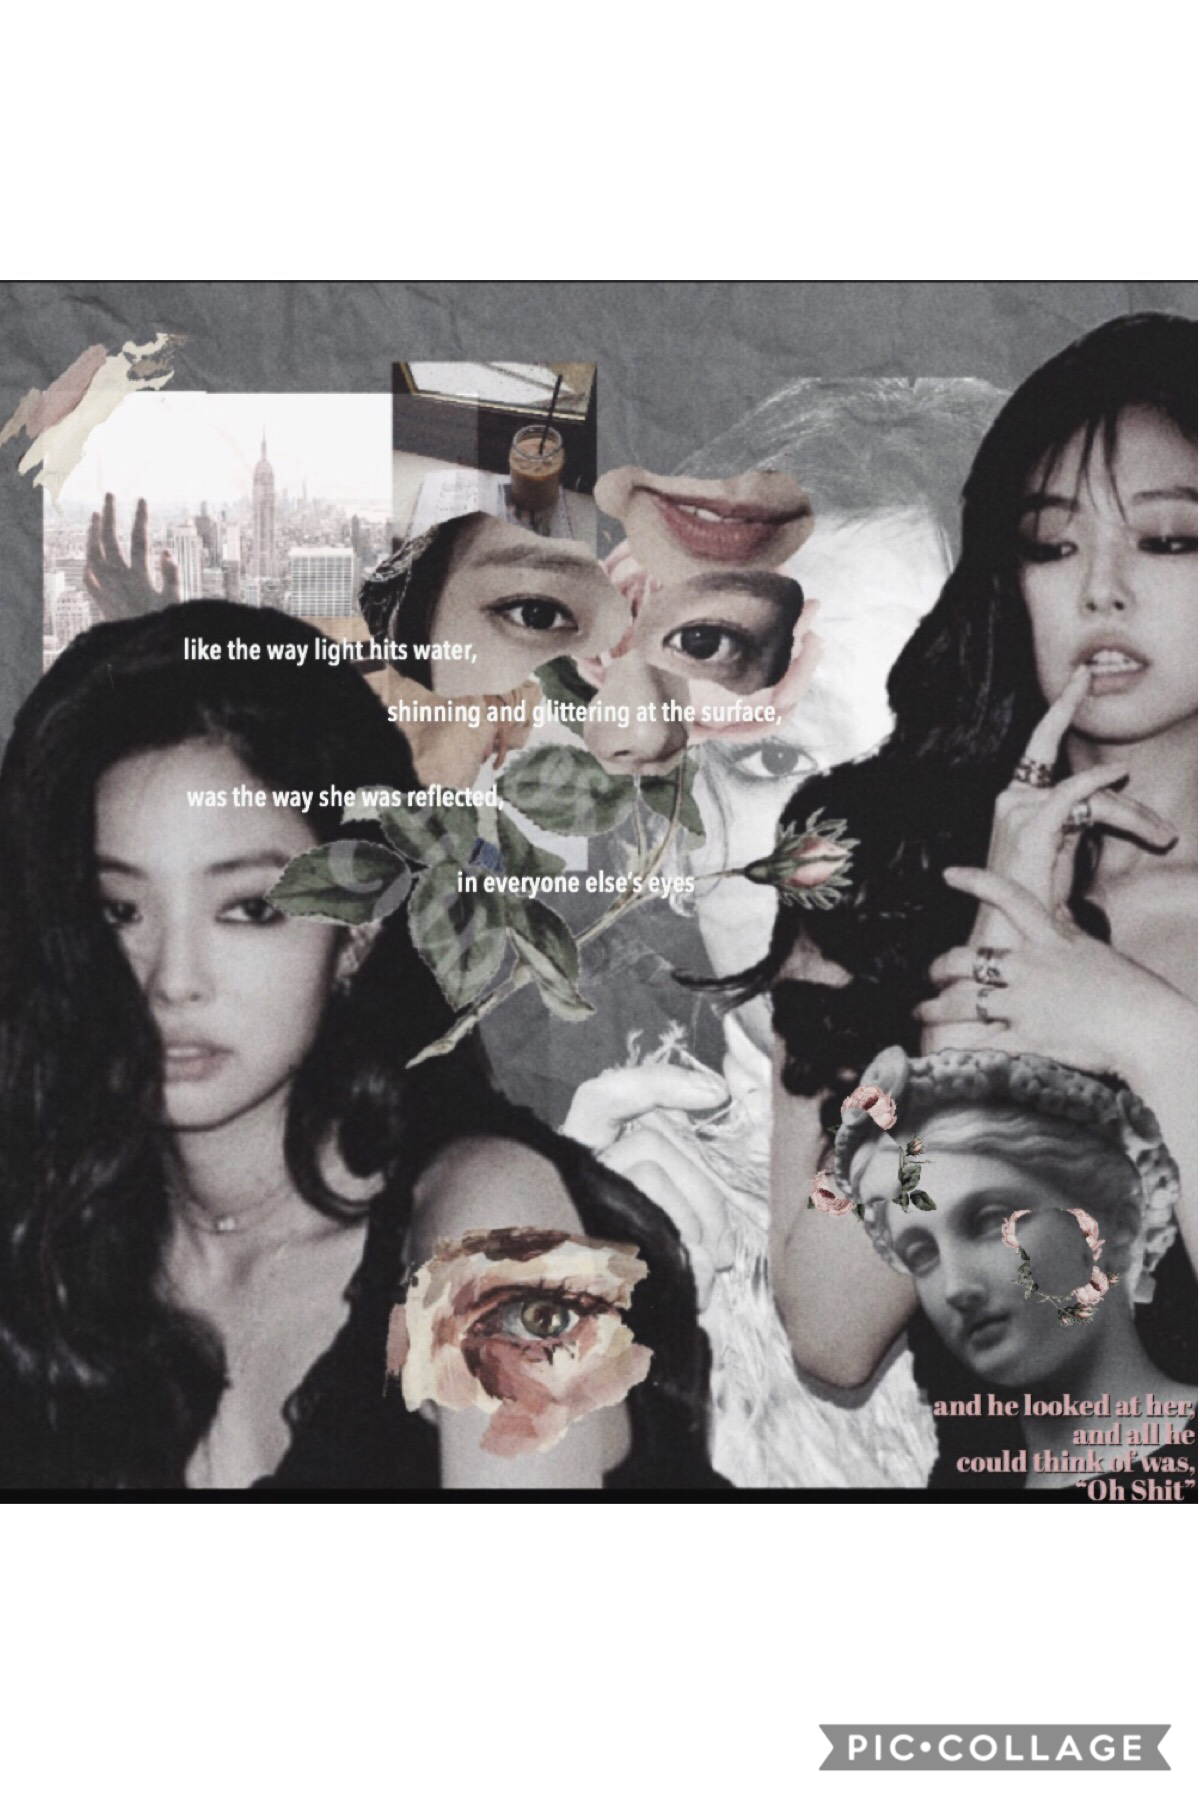 collab with...
the BEAUTIFUL @kaelye!!!

she picked out some of the photos and i did the compiling and editing💕
she has such and artistic eye and did helped make this edit beautiful💕 i had fun working with u!!!!
•[continued in comments]•